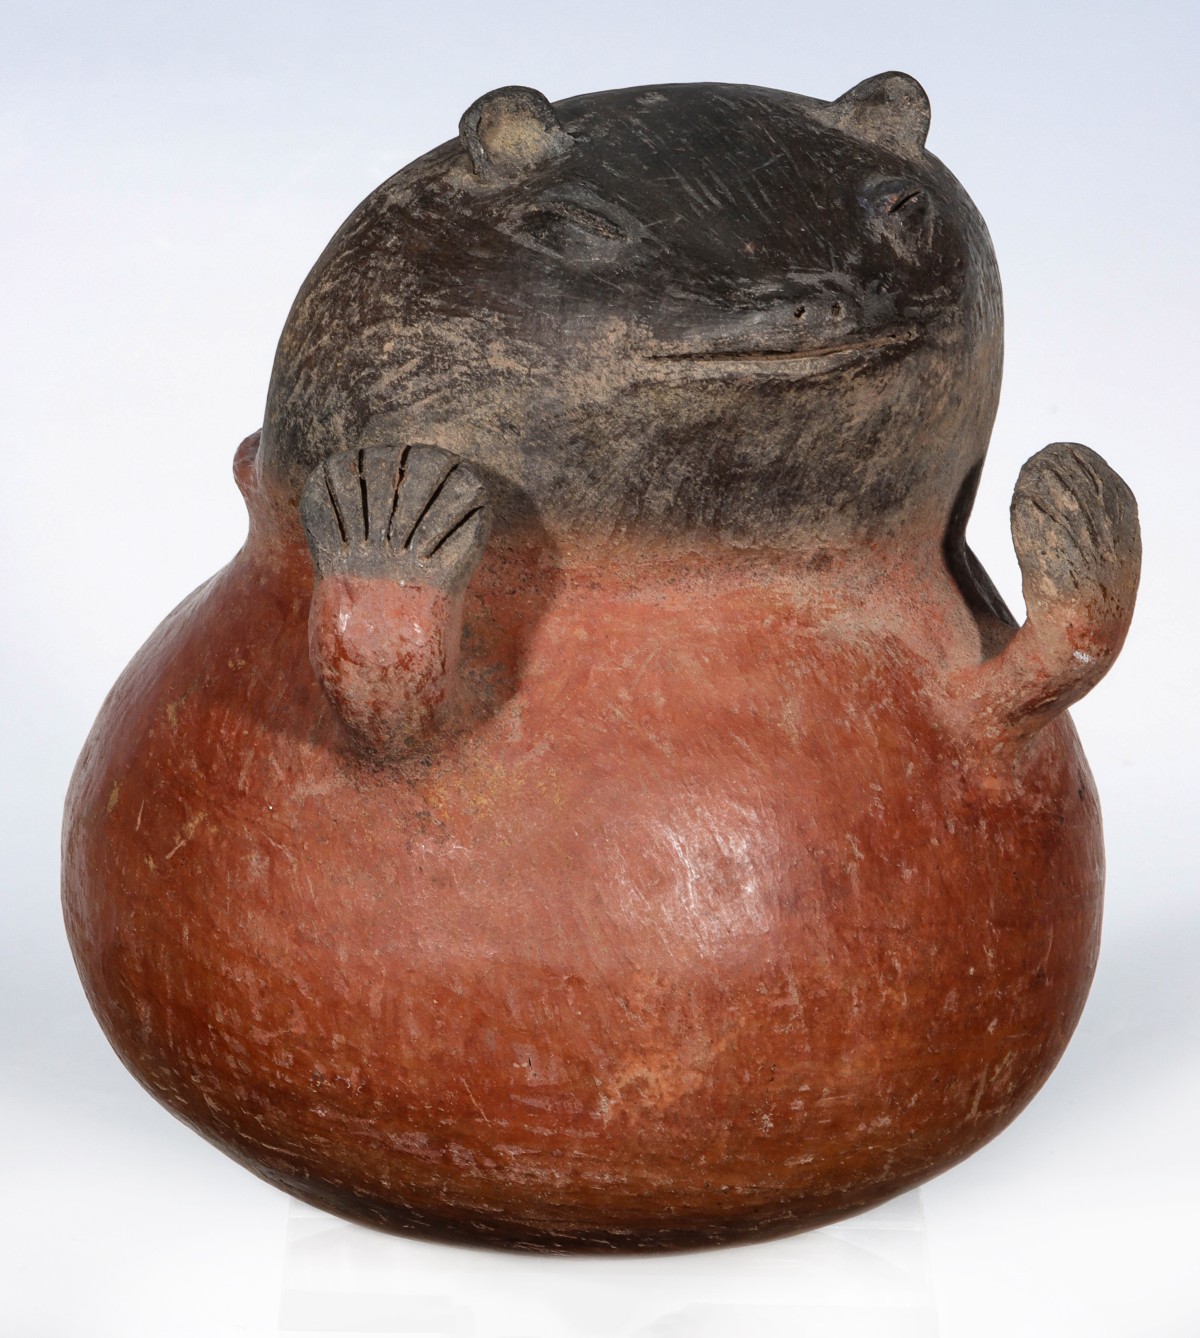 A MIDDLE MISSISSIPPIAN PERIOD EFFIGY POT ATTR CAHOKIA